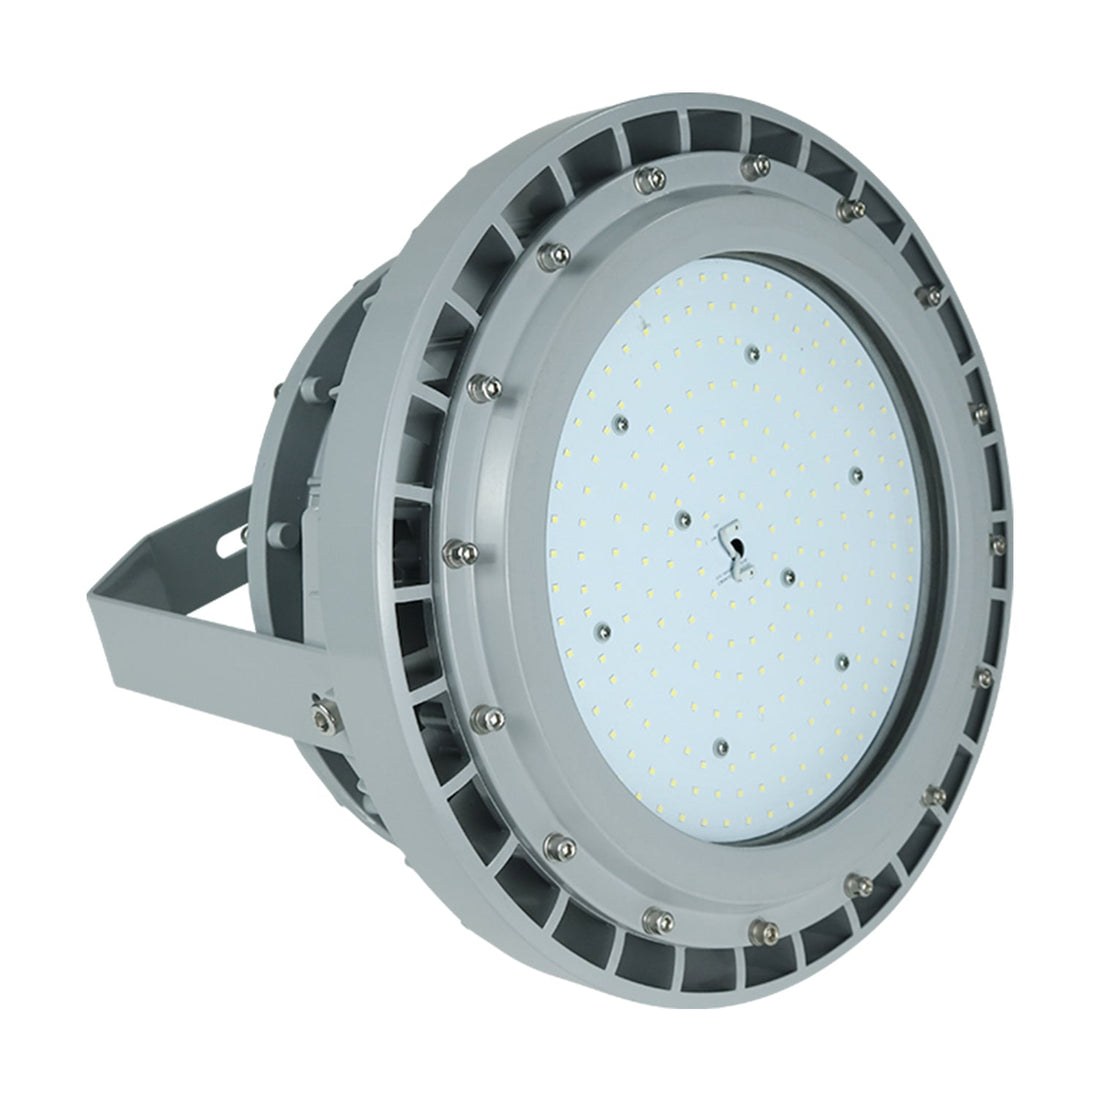 Efficient and Versatile: 80W LED Explosion-Proof High Bay Light for Hazardous Locations - Dimmable, 5000K, 10800LM, IP66 Rated